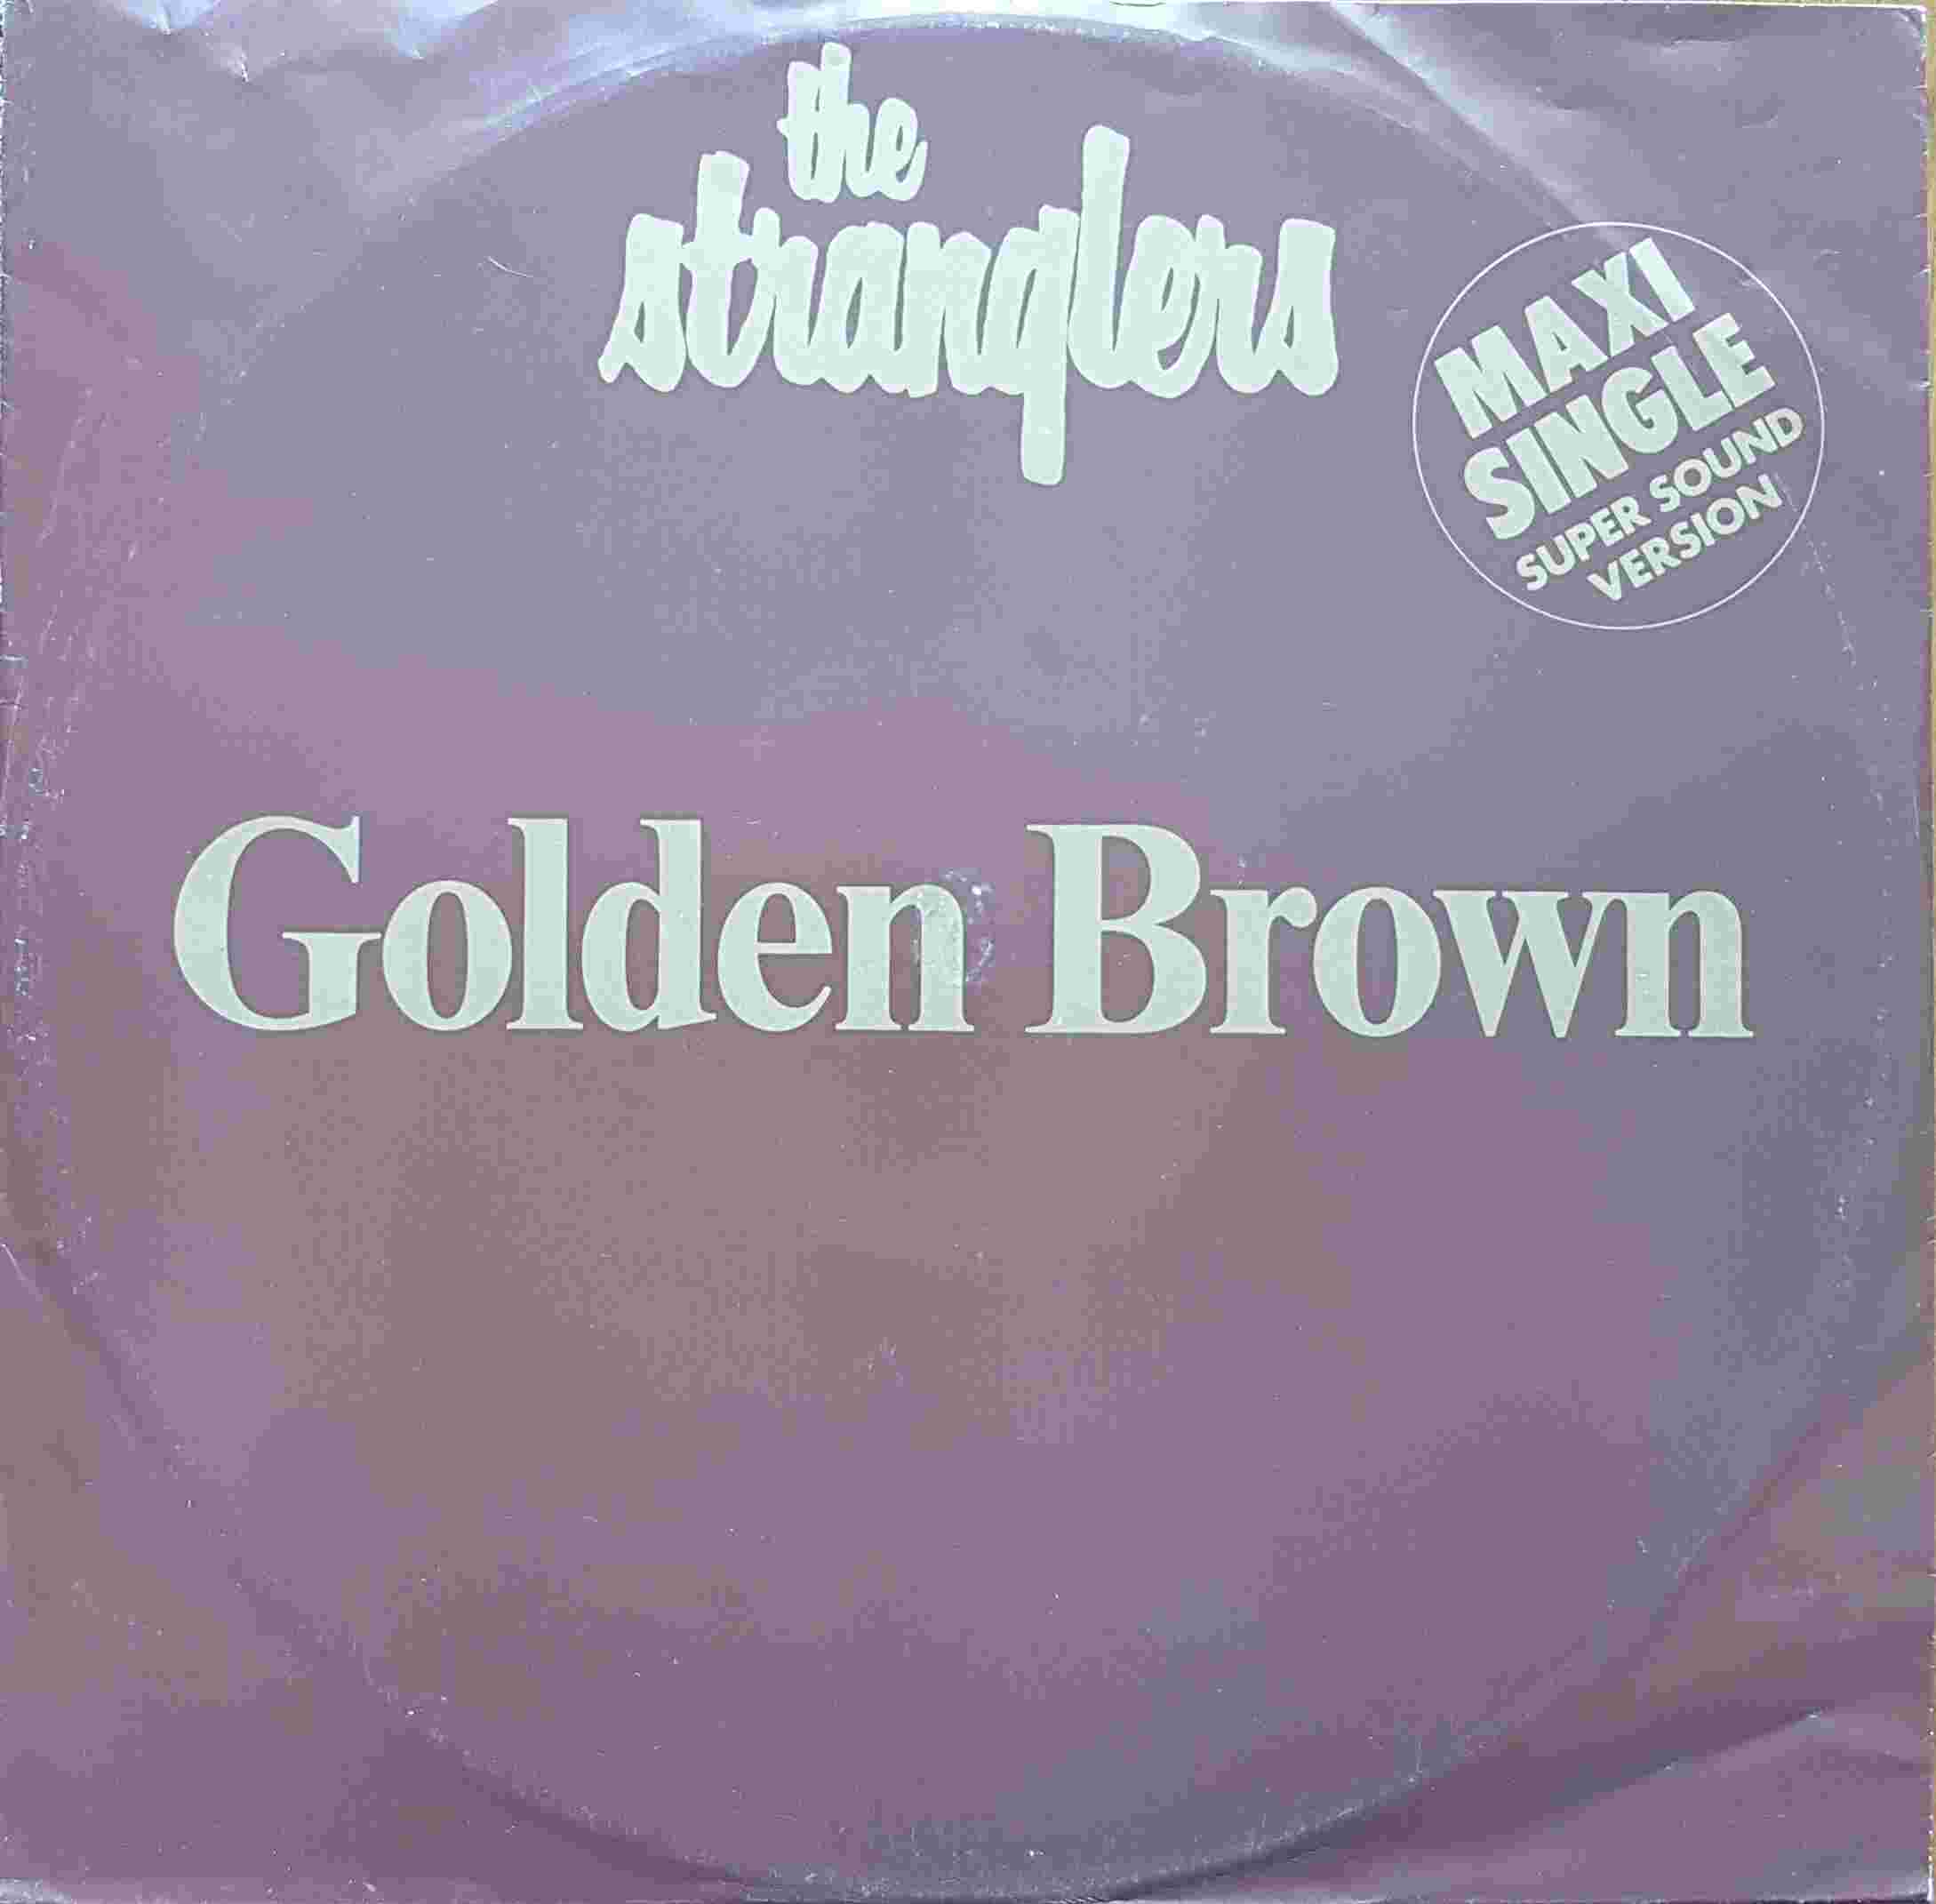 Picture of Golden brown by artist The Stranglers from The Stranglers 12inches